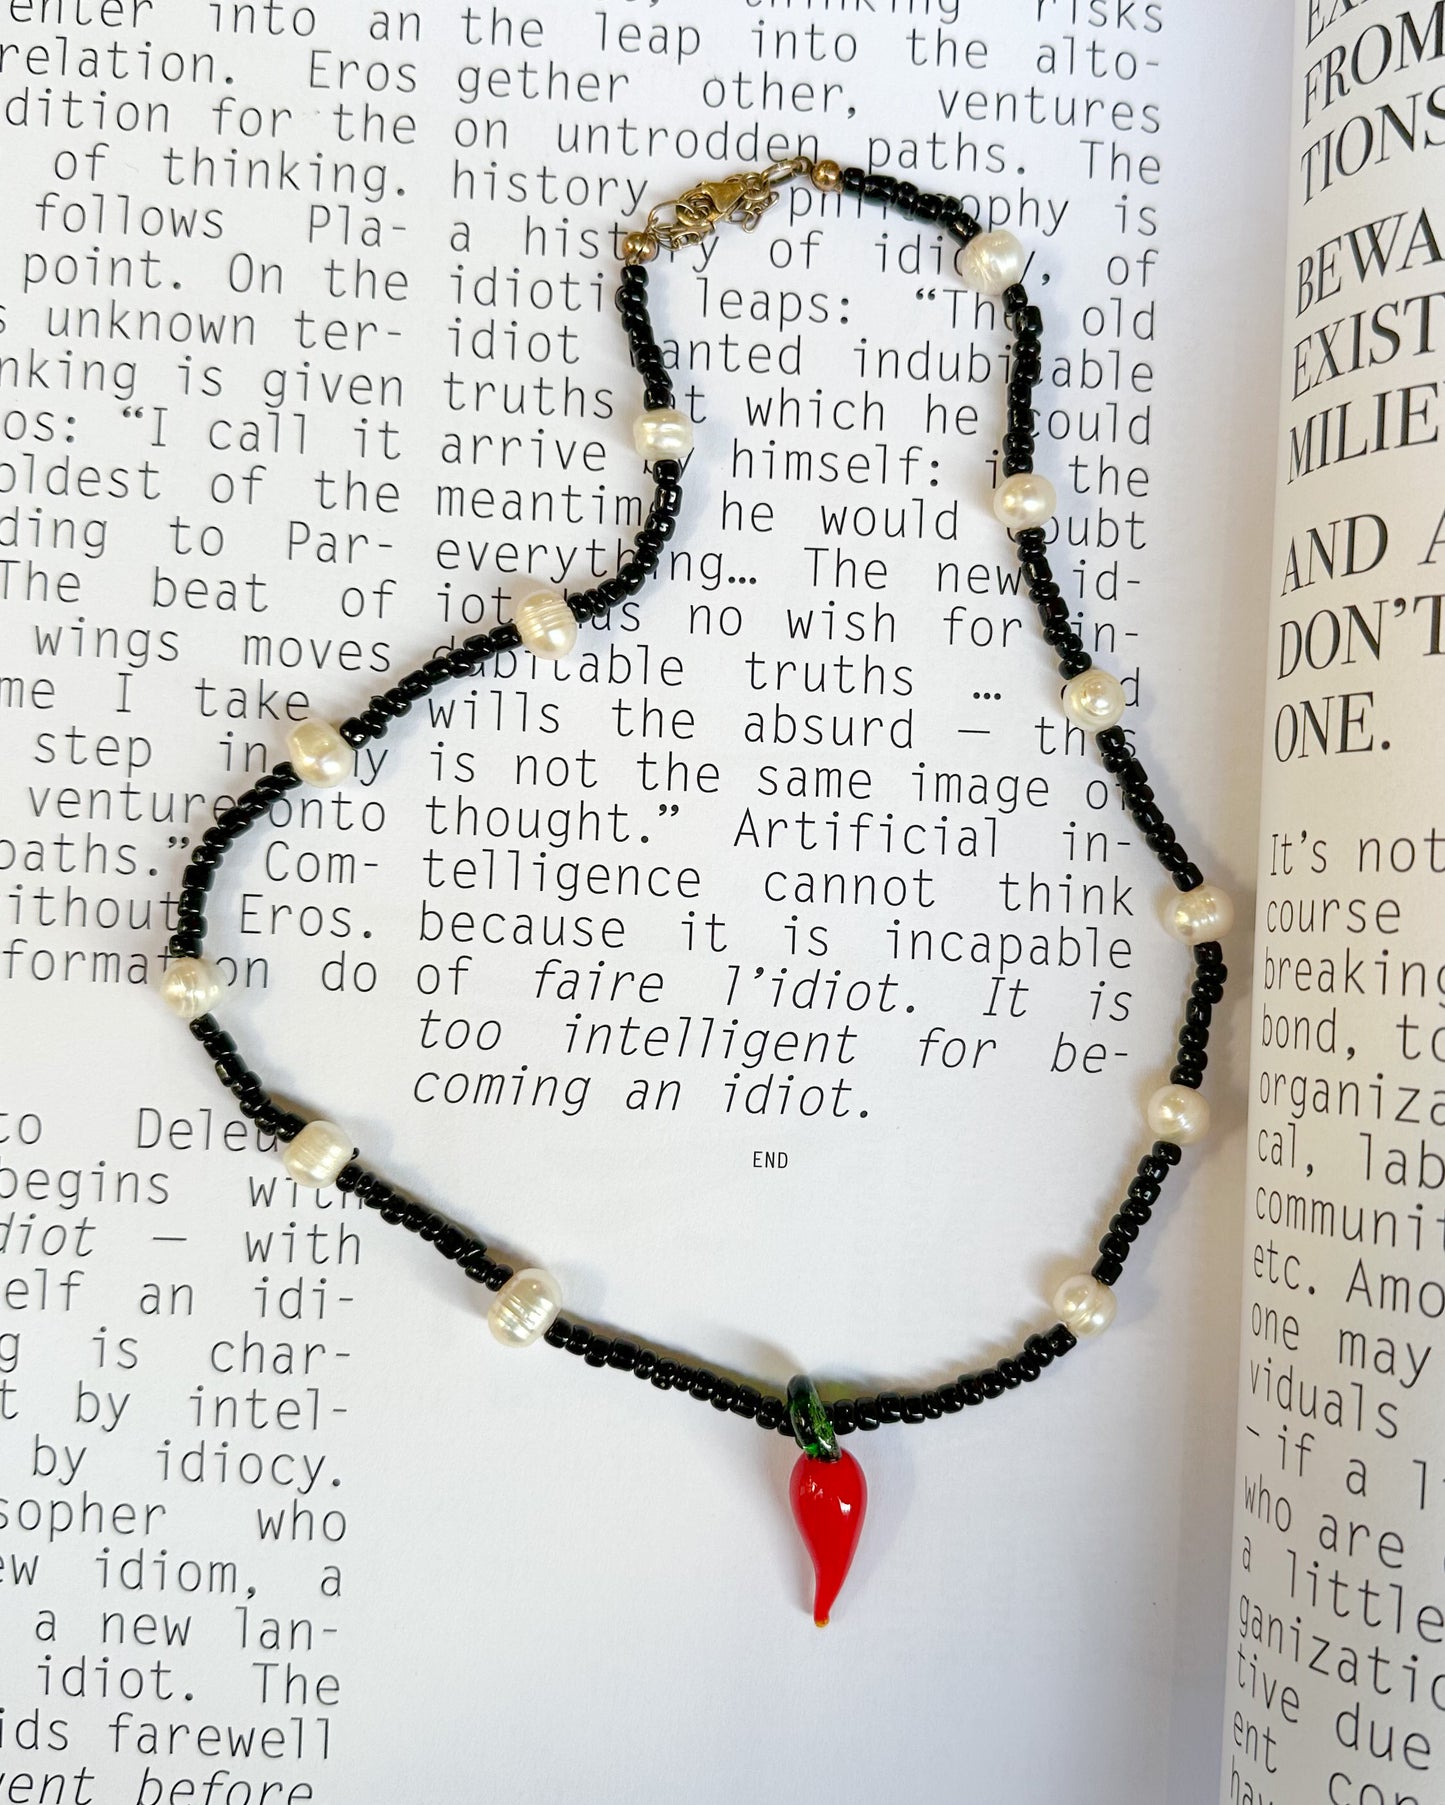 Pearls + cristal chili and black beads necklace.